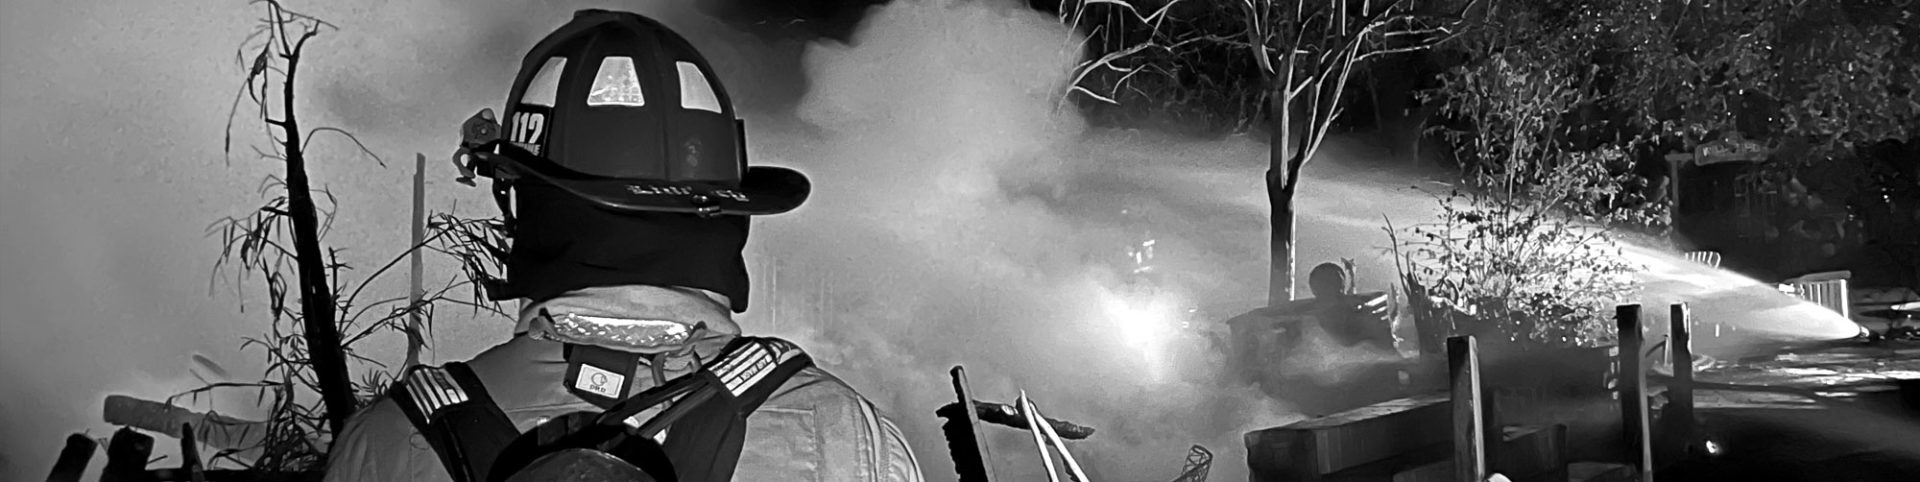 photo of fire fighter facing smoke and back spray